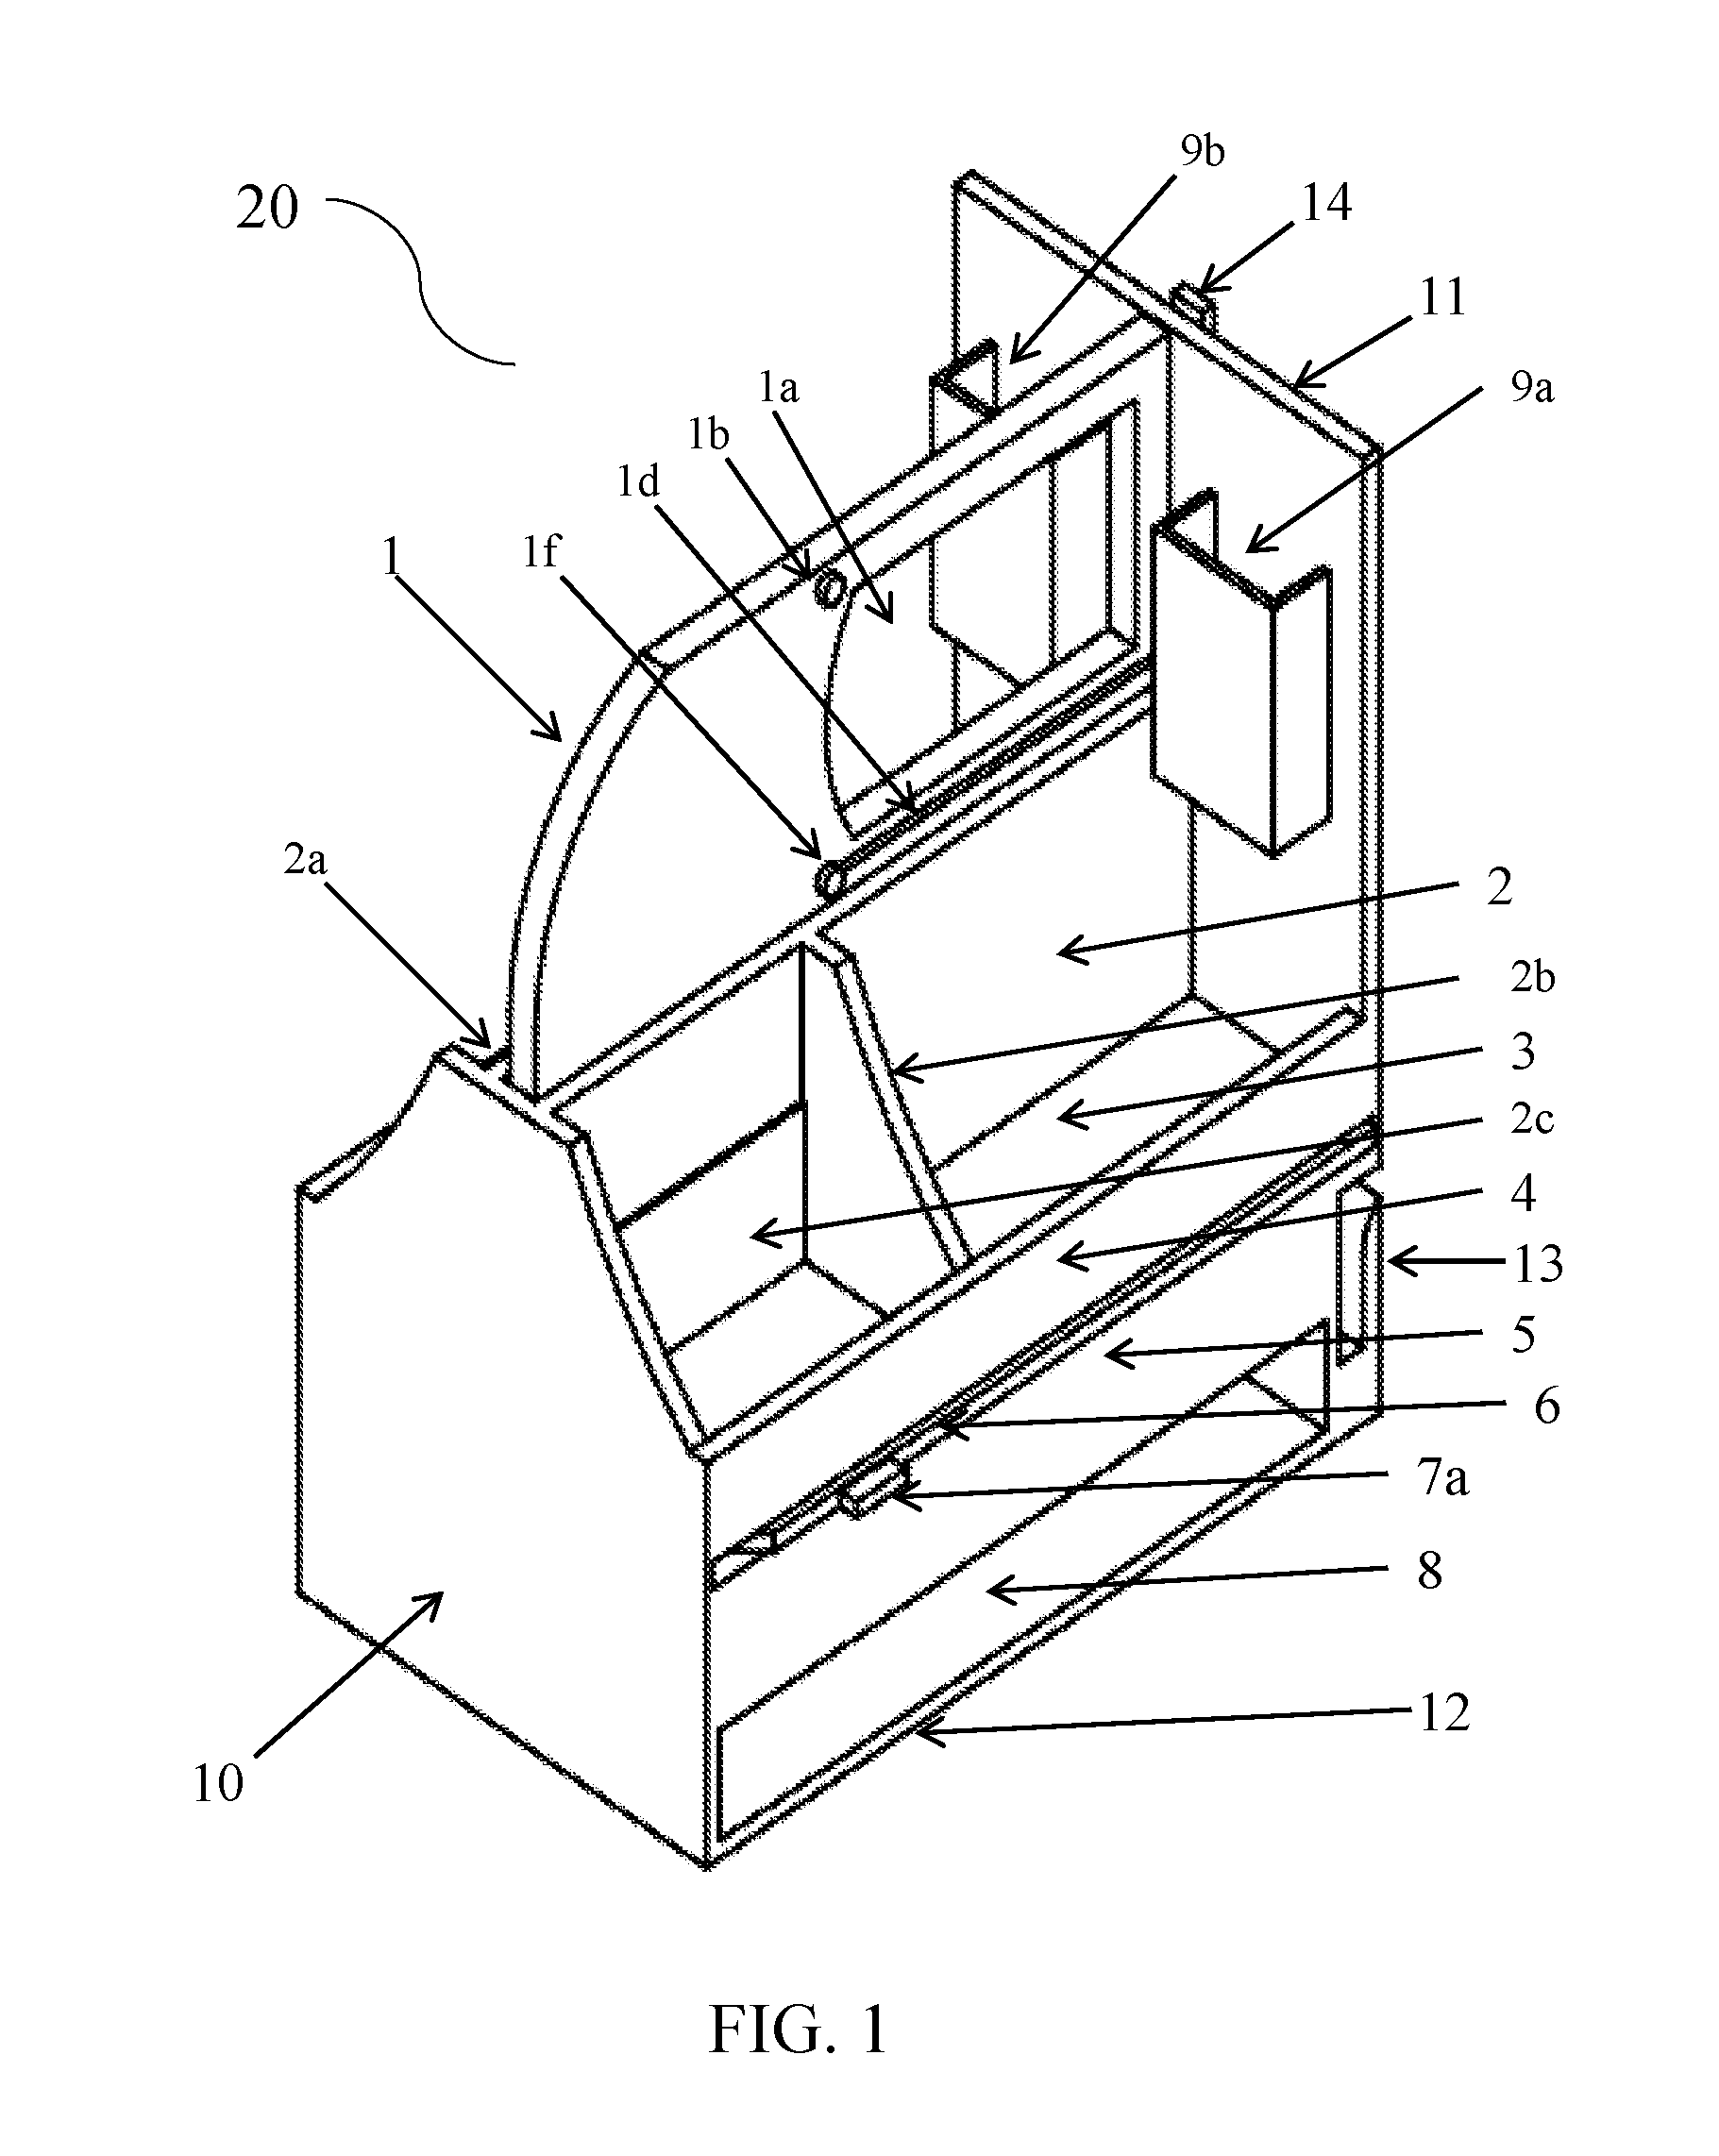 Seat divider with recessed top panel and two-way viewing window